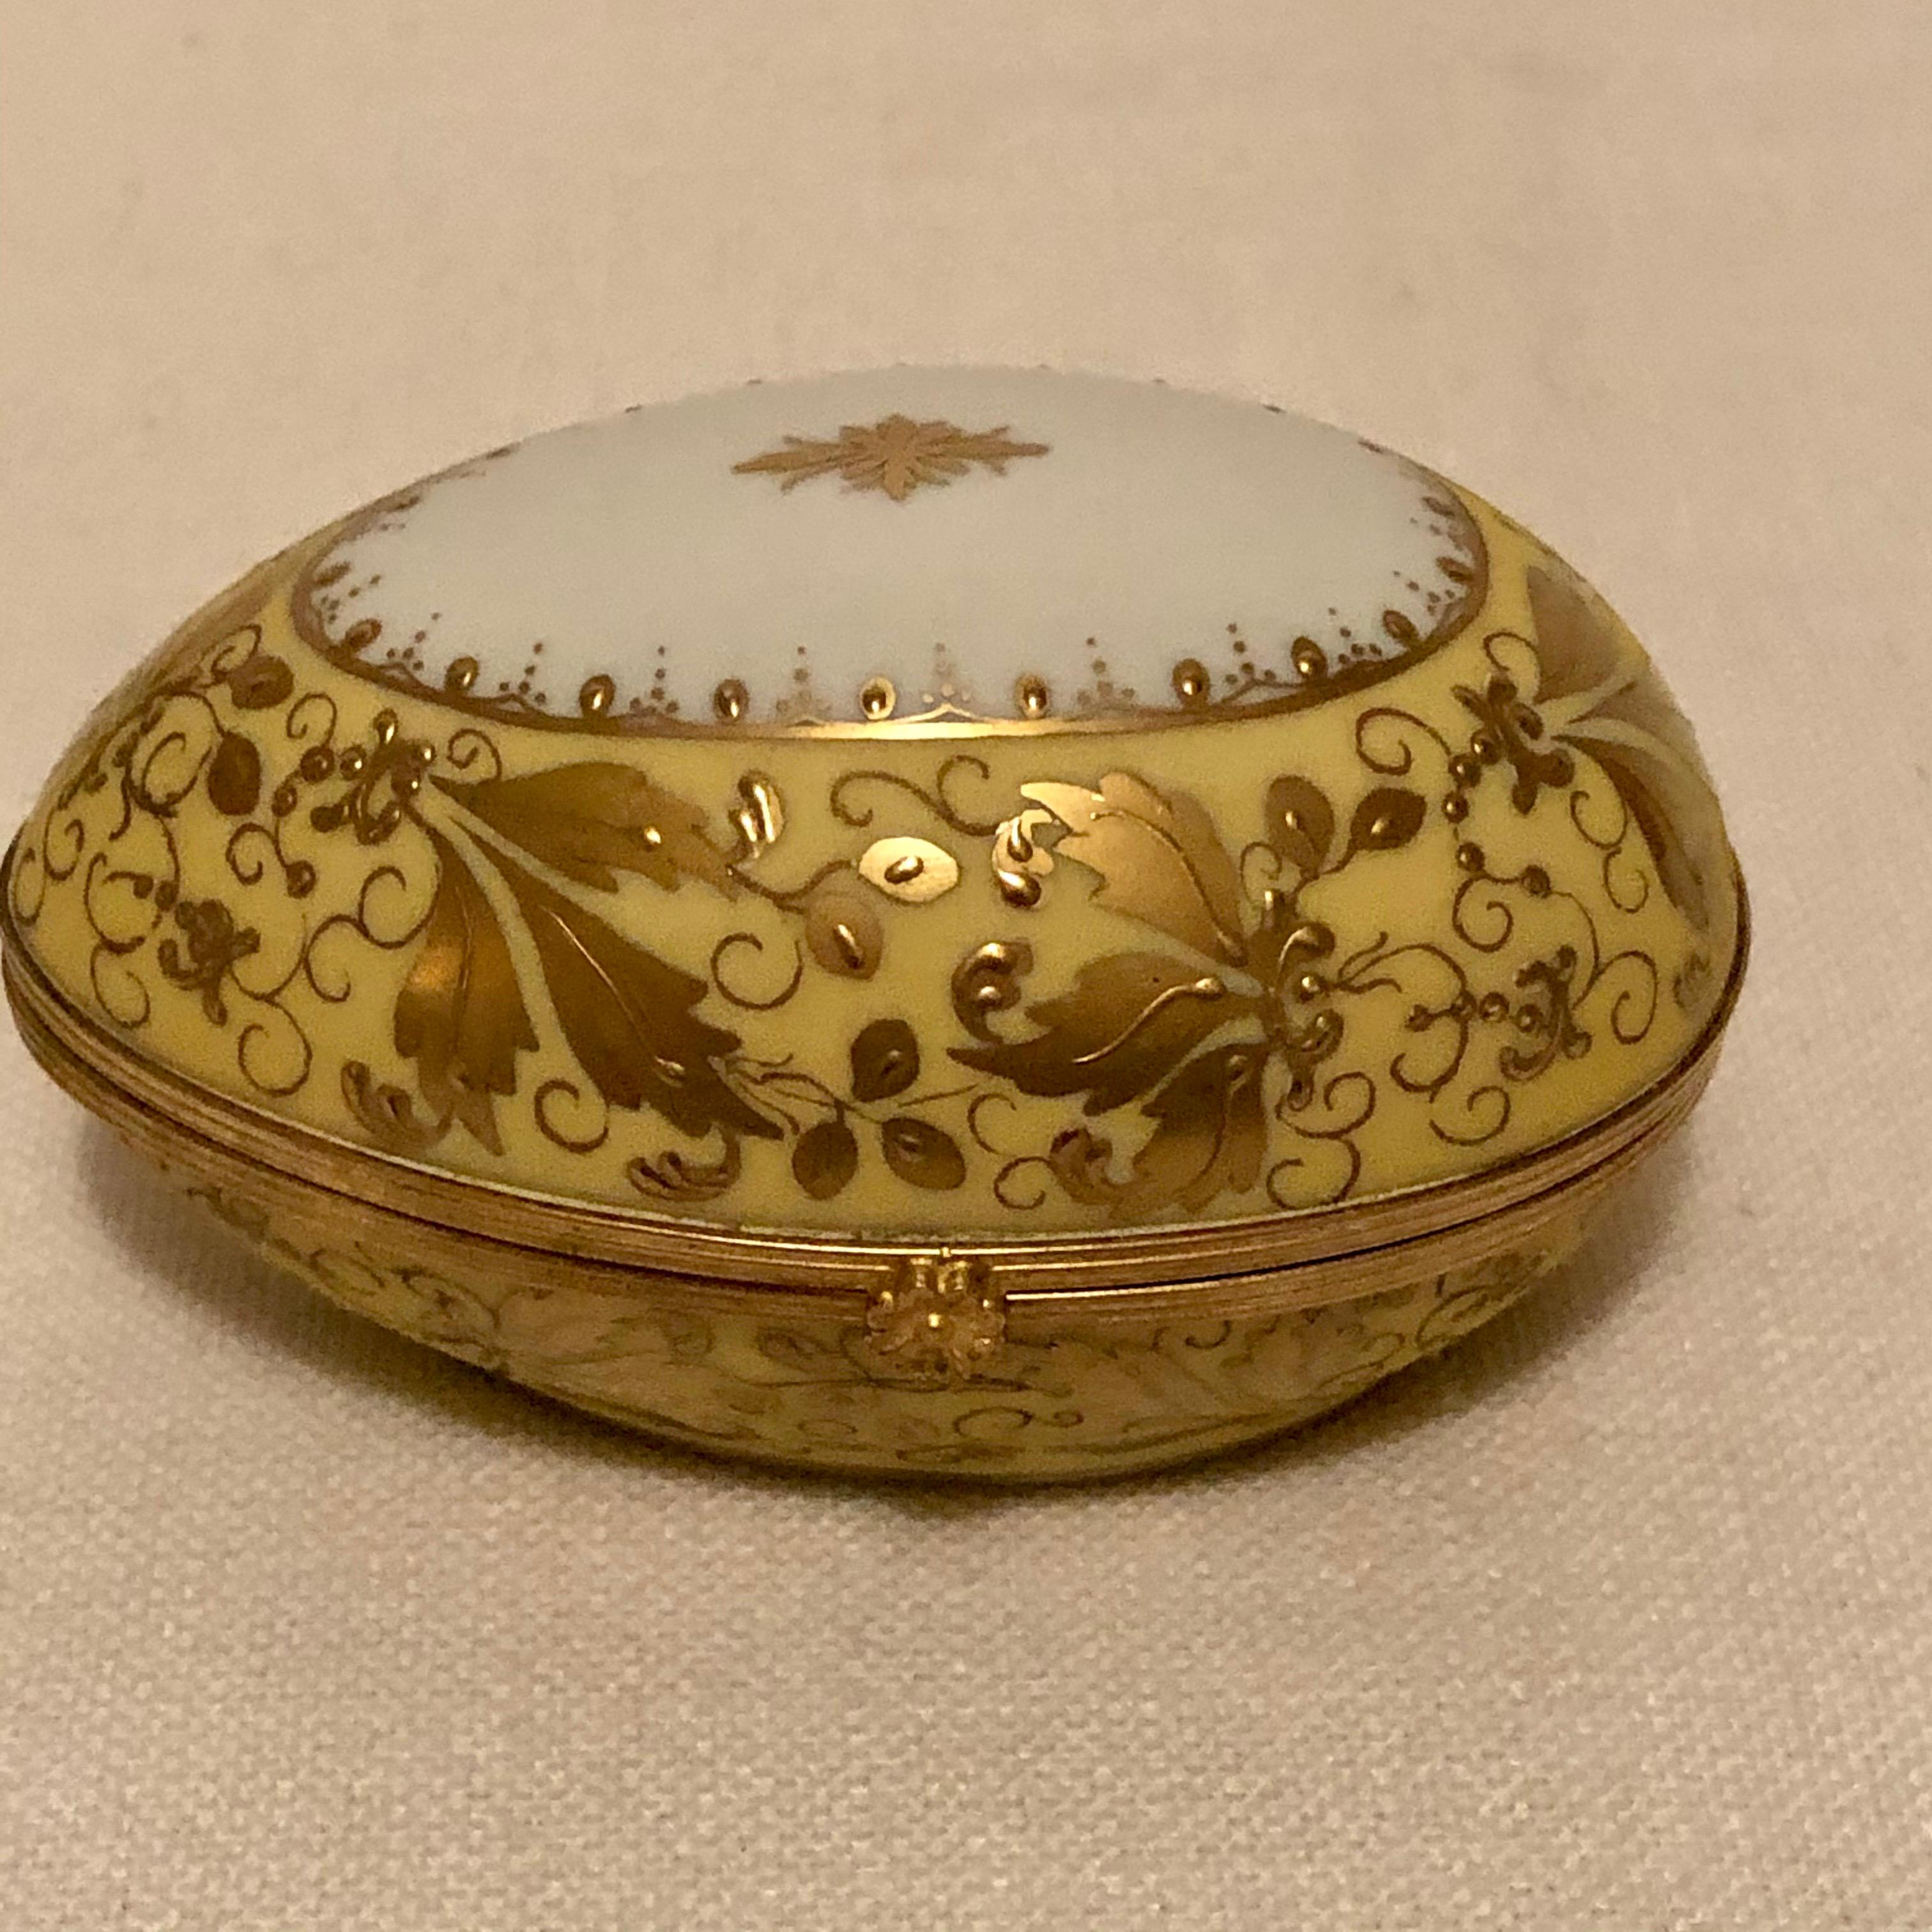 This is a wonderful Le Tallec egg shaped box, which is decorated with elaborate raised gilding and gilt jeweling. Look at the pictures to see the intricate raised gilding decoration all over this egg shaped box. This box was decorated in the studio